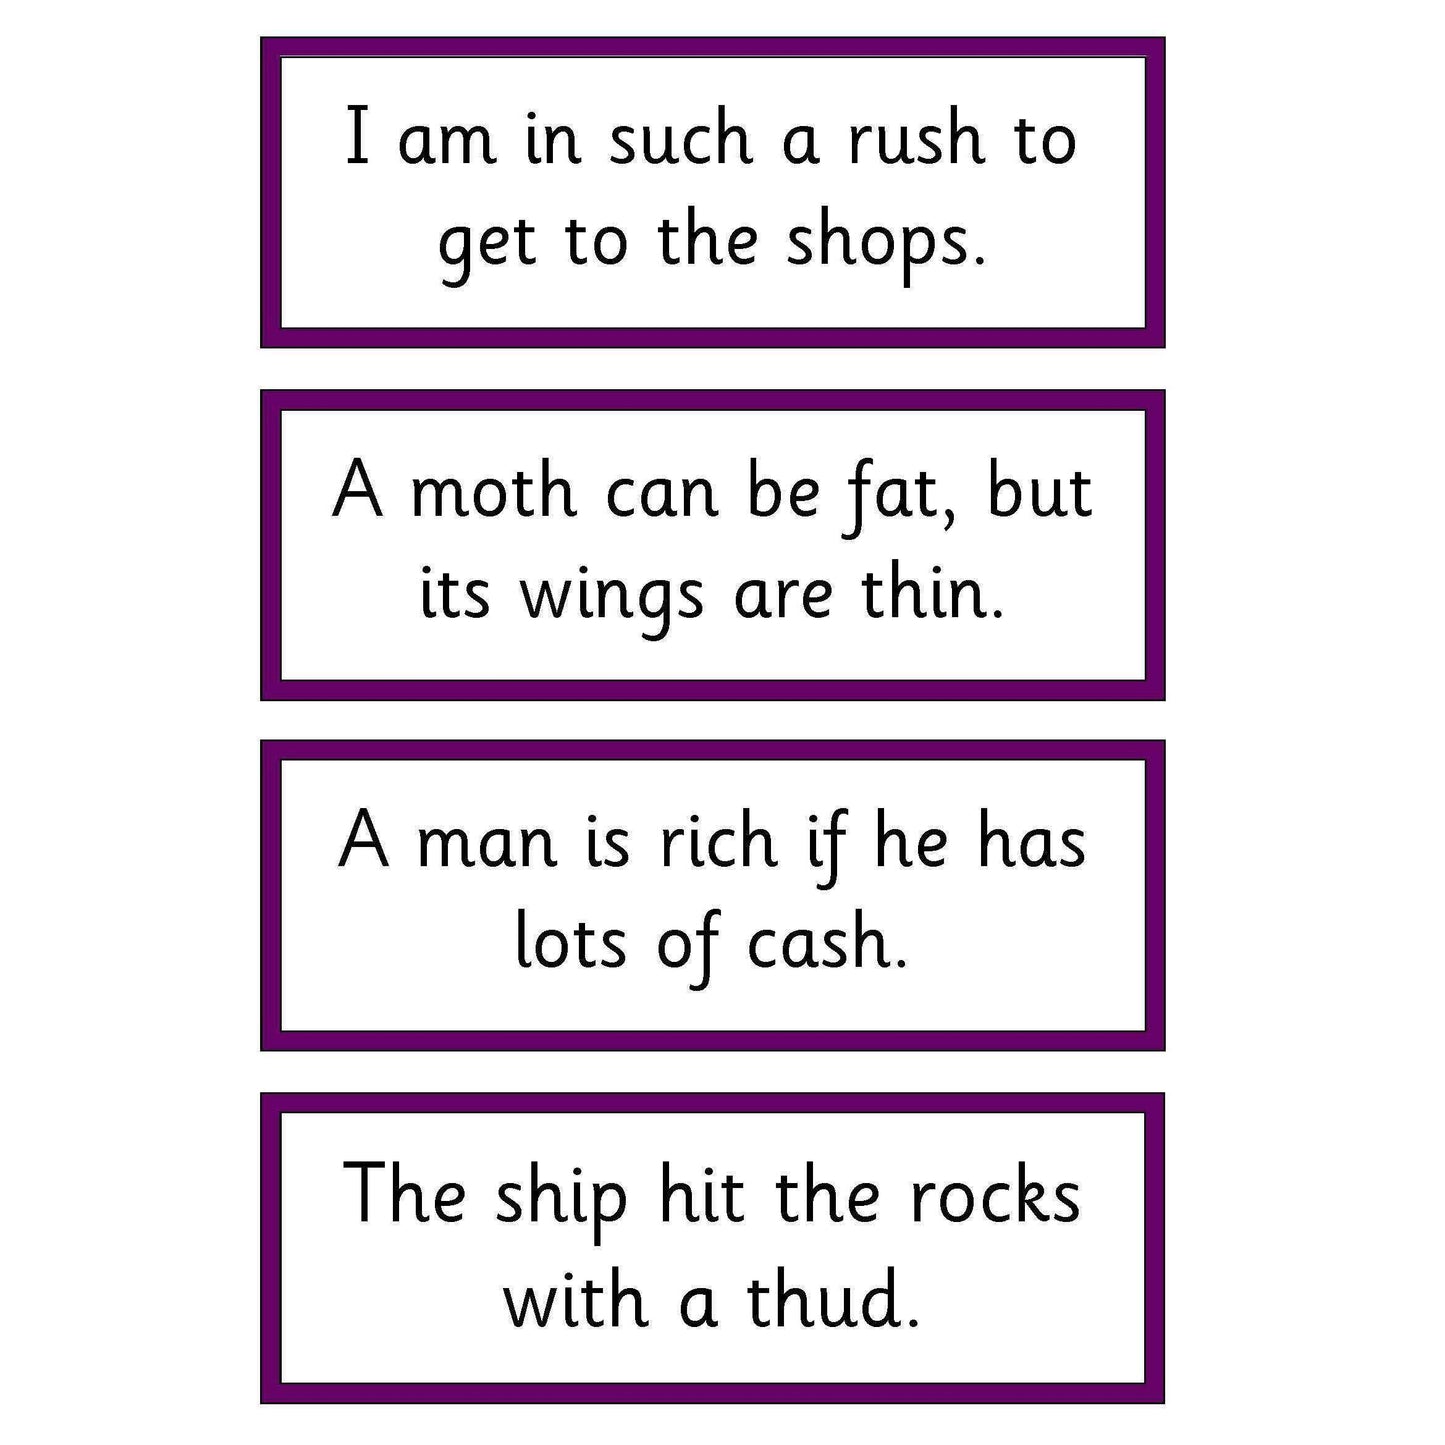 Letters and Sounds Phase 3 Captions Pack:Primary Classroom Resources